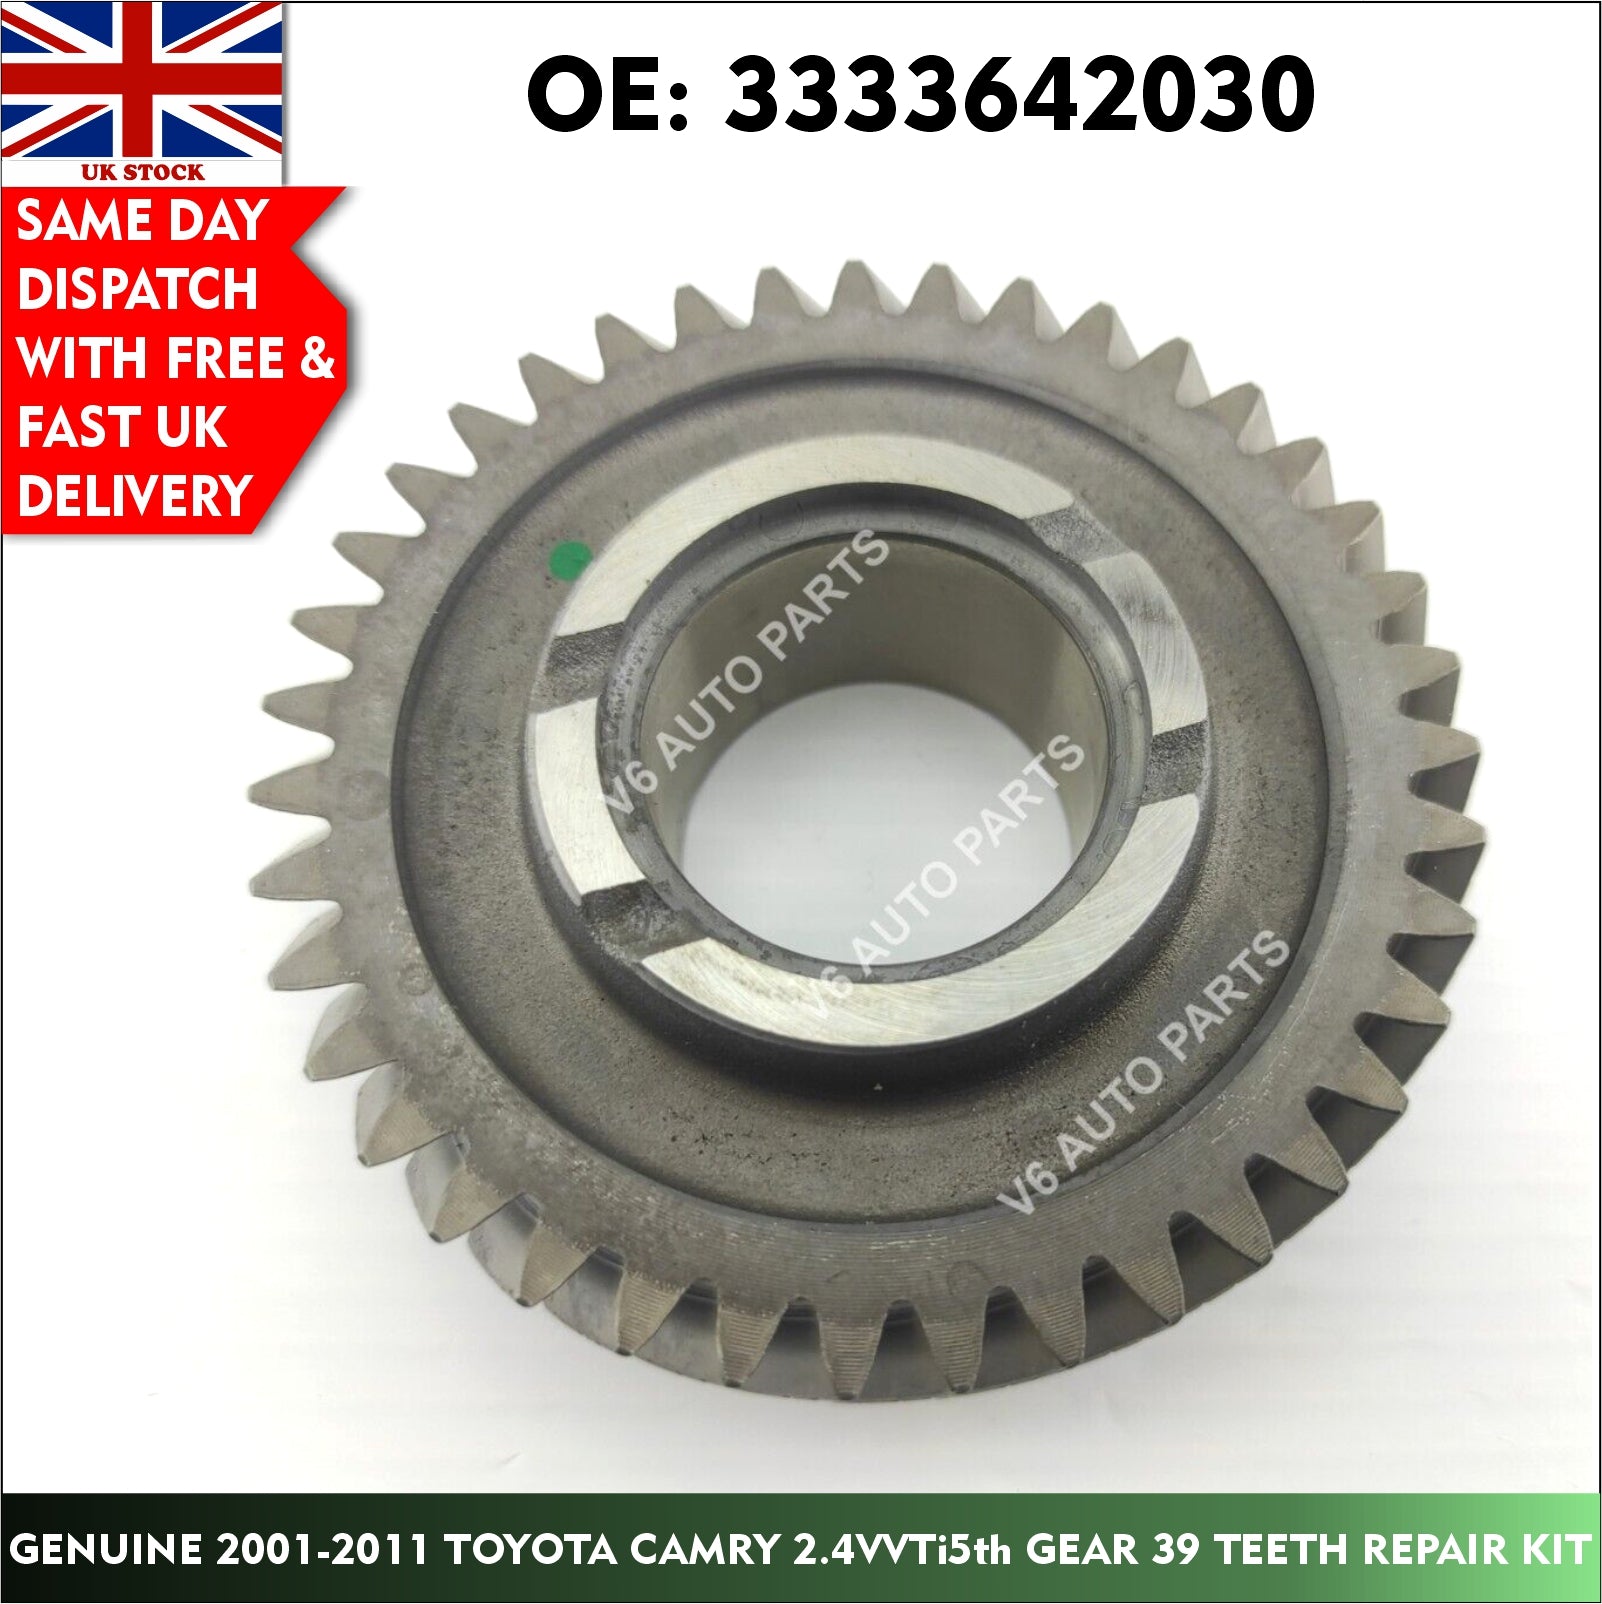 BRAND NEW GENUINE 5TH GEAR 39 TEETH FOR 1999 - 2003 TOYOTA AVENSIS  33336-42030